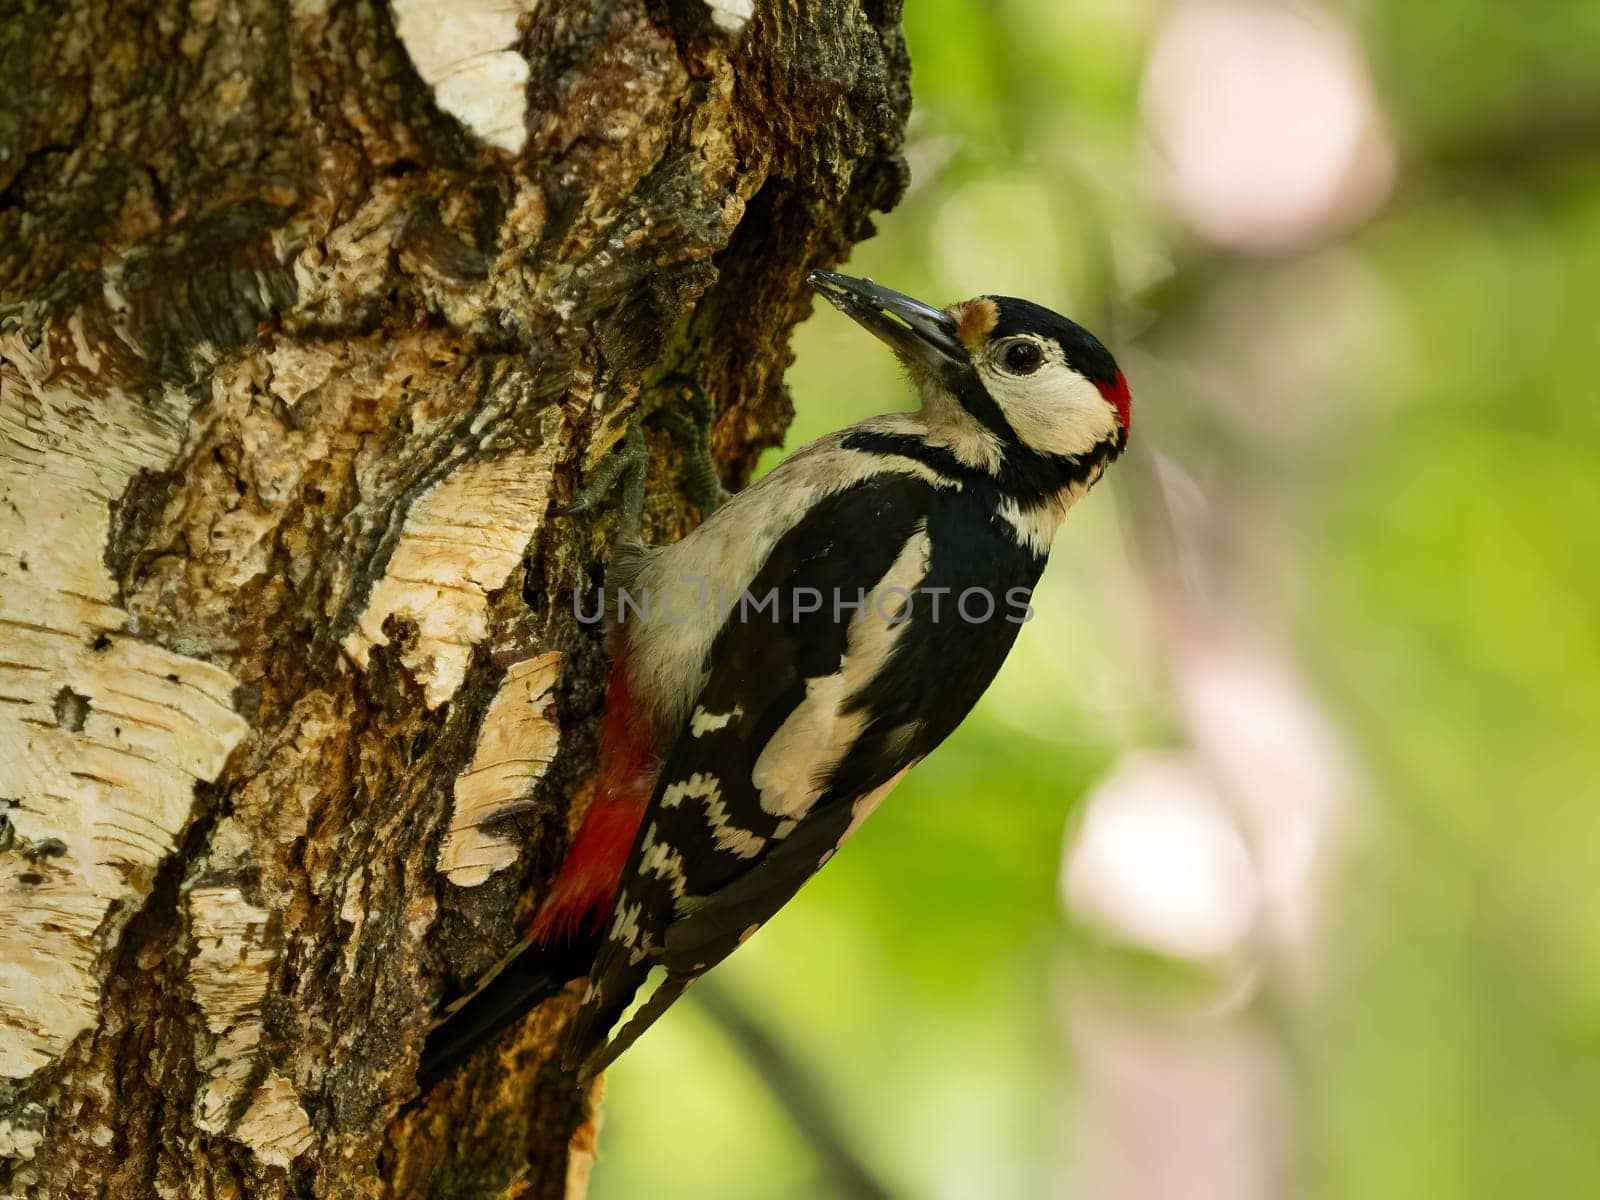 The vibrant greenery serves as a backdrop to the majestic sight of a Great Spotted Woodpecker perched on a birch tree, its red crown shining brightly.